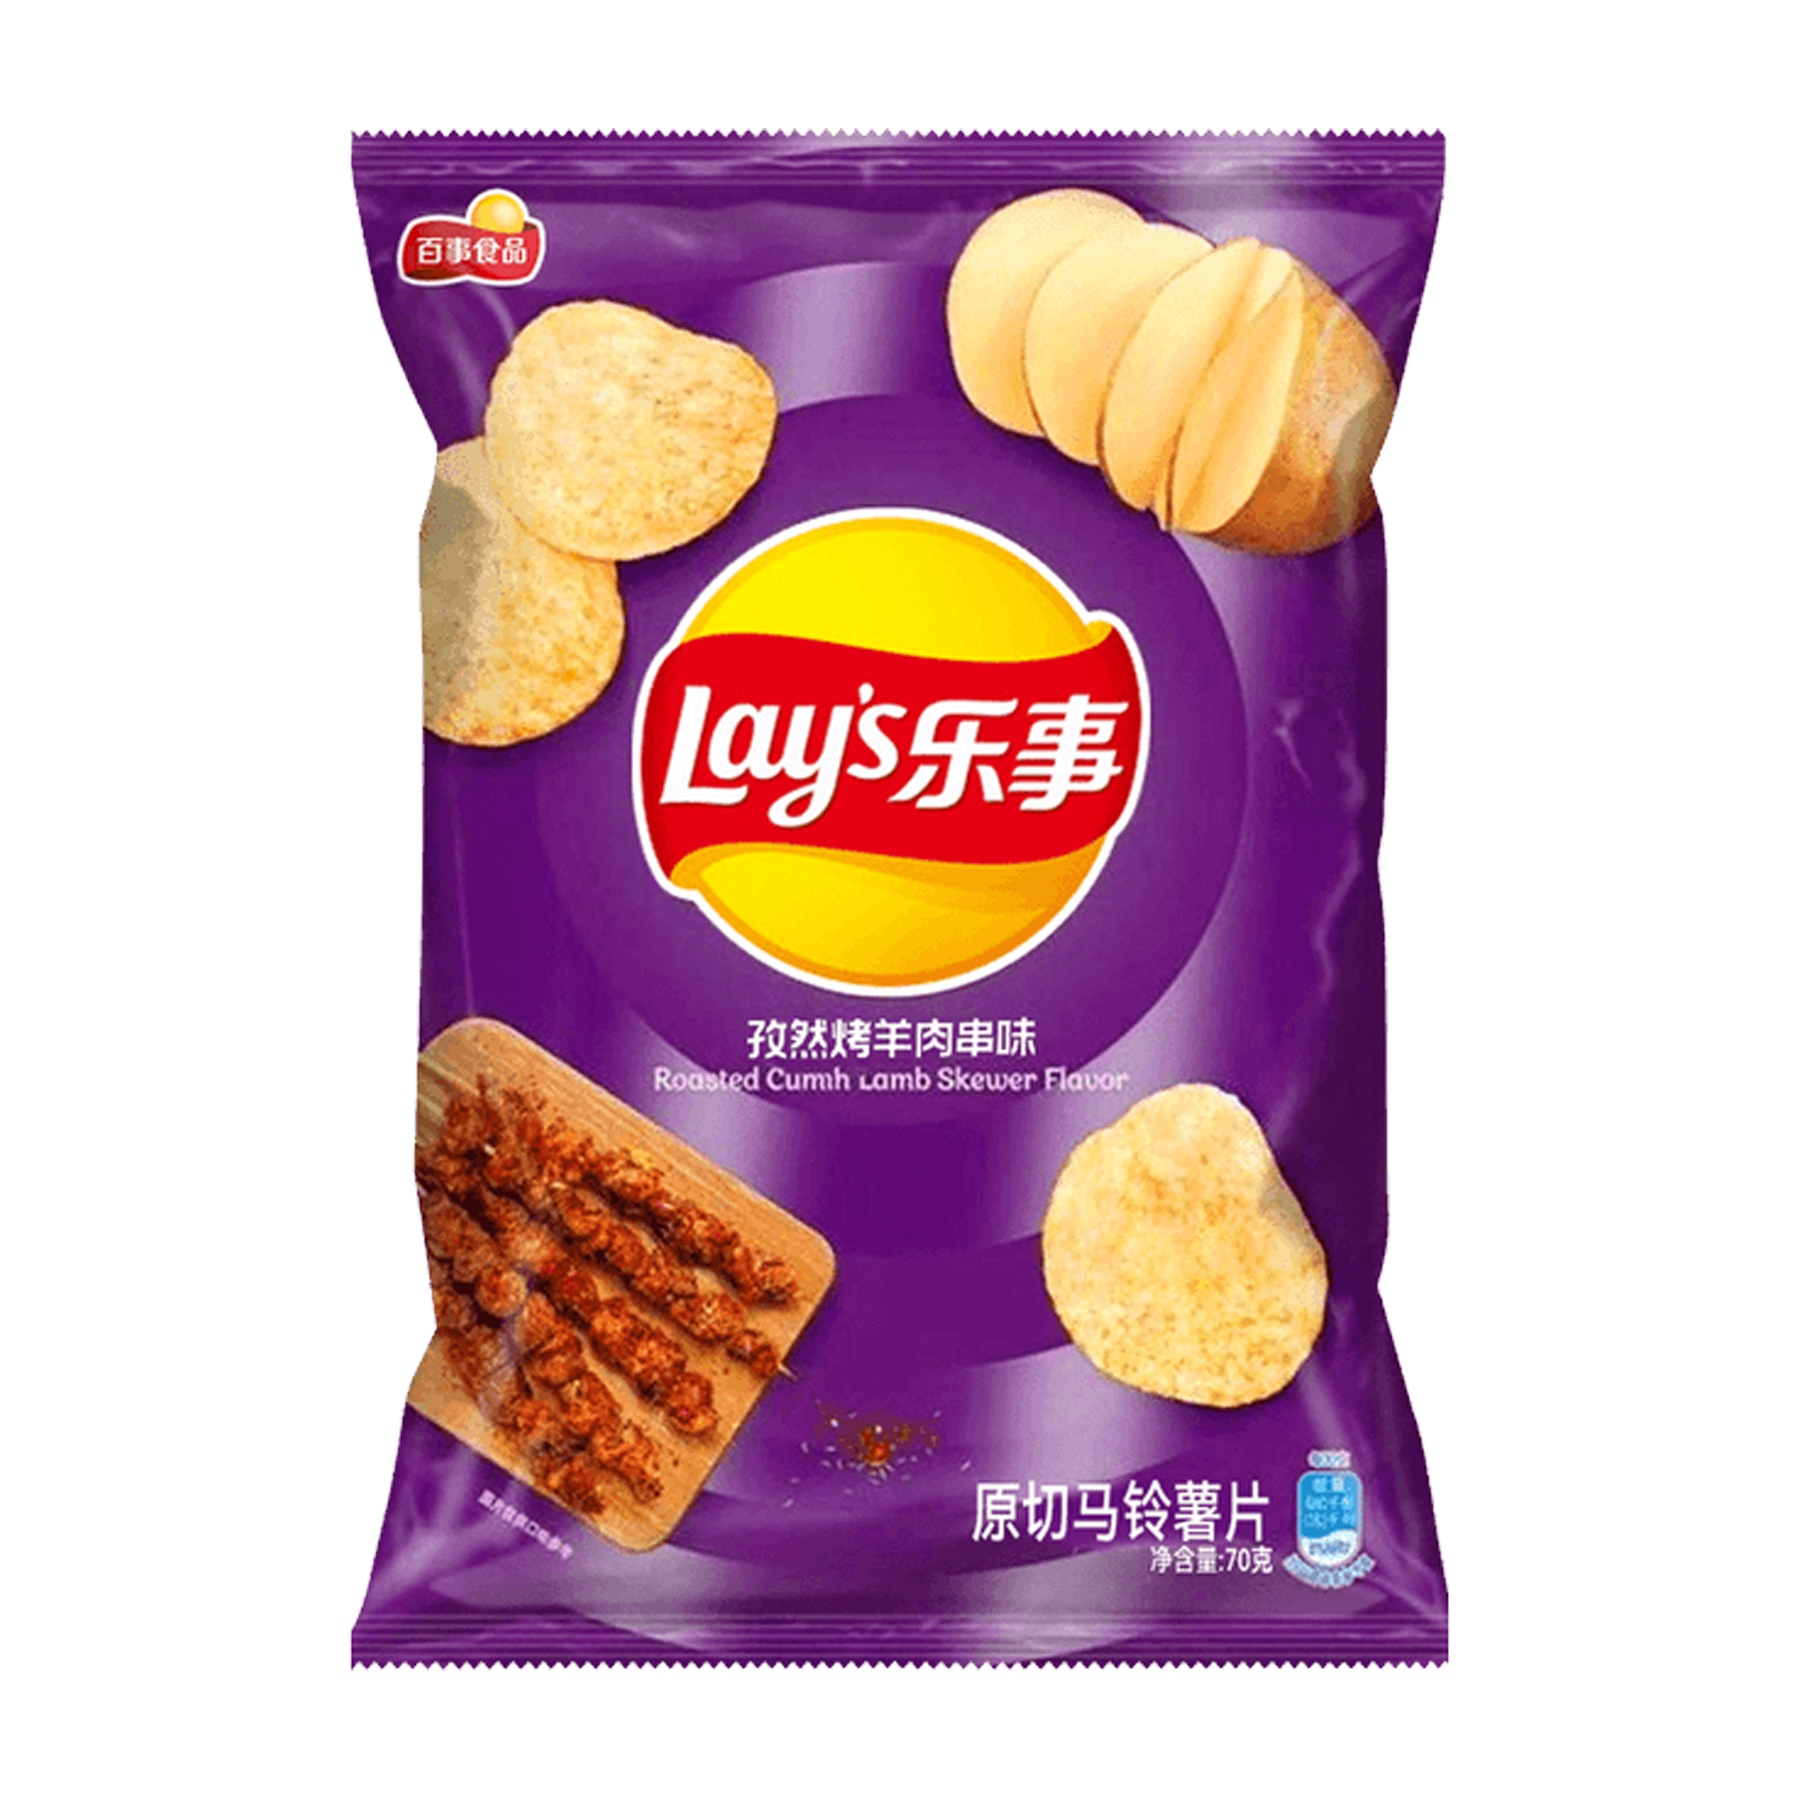 Lays Roasted Cumin Lamb Flavored Chips